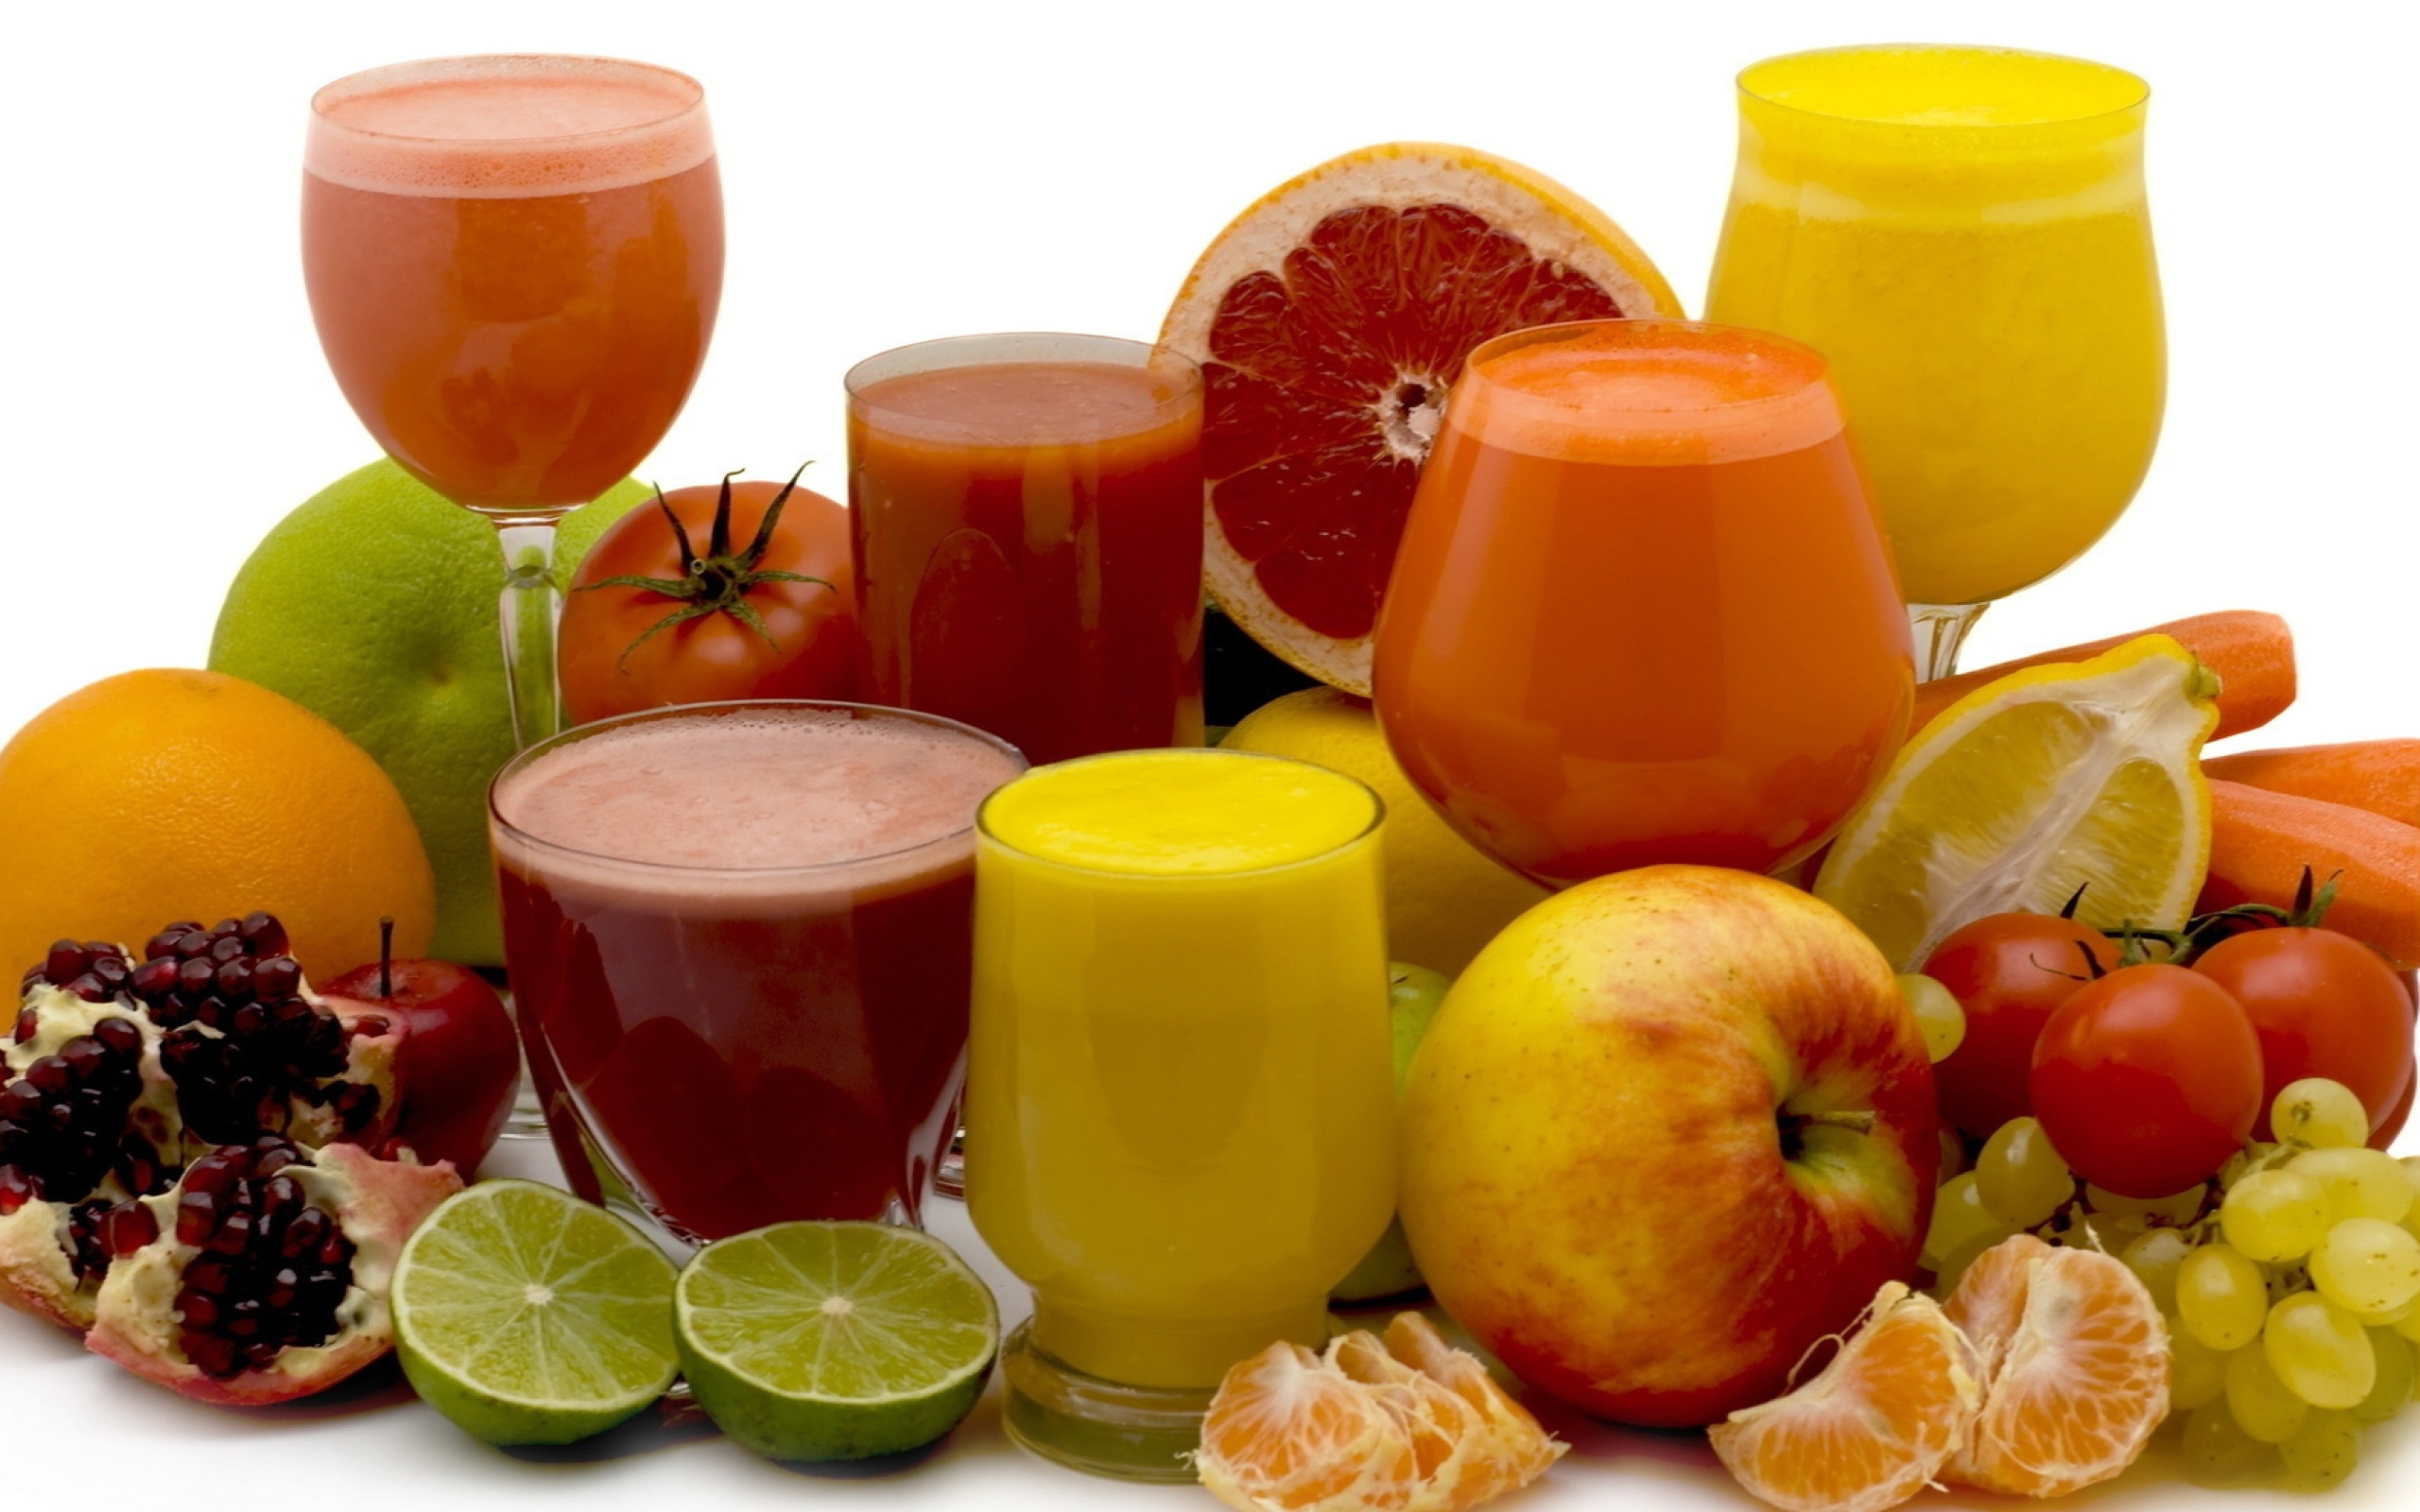 Different fresh juices on a white background with fruits